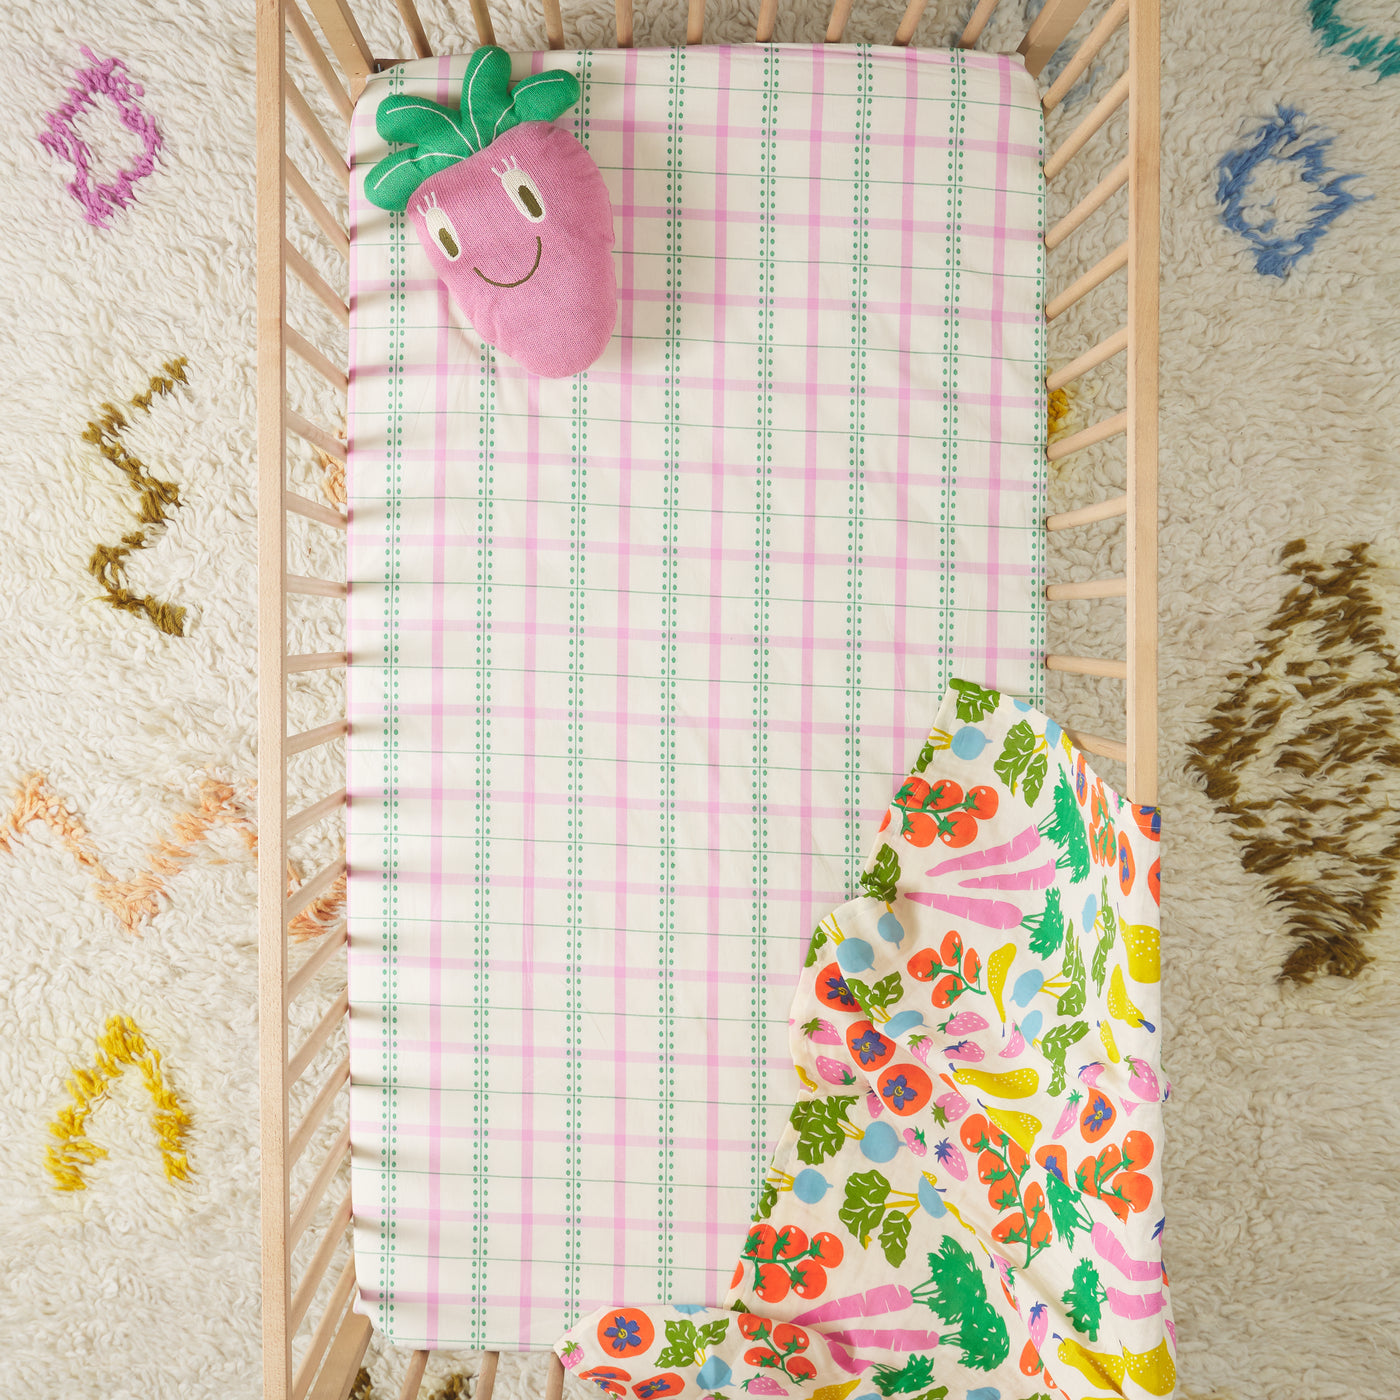 Mica Cotton Fitted Sheet Cot